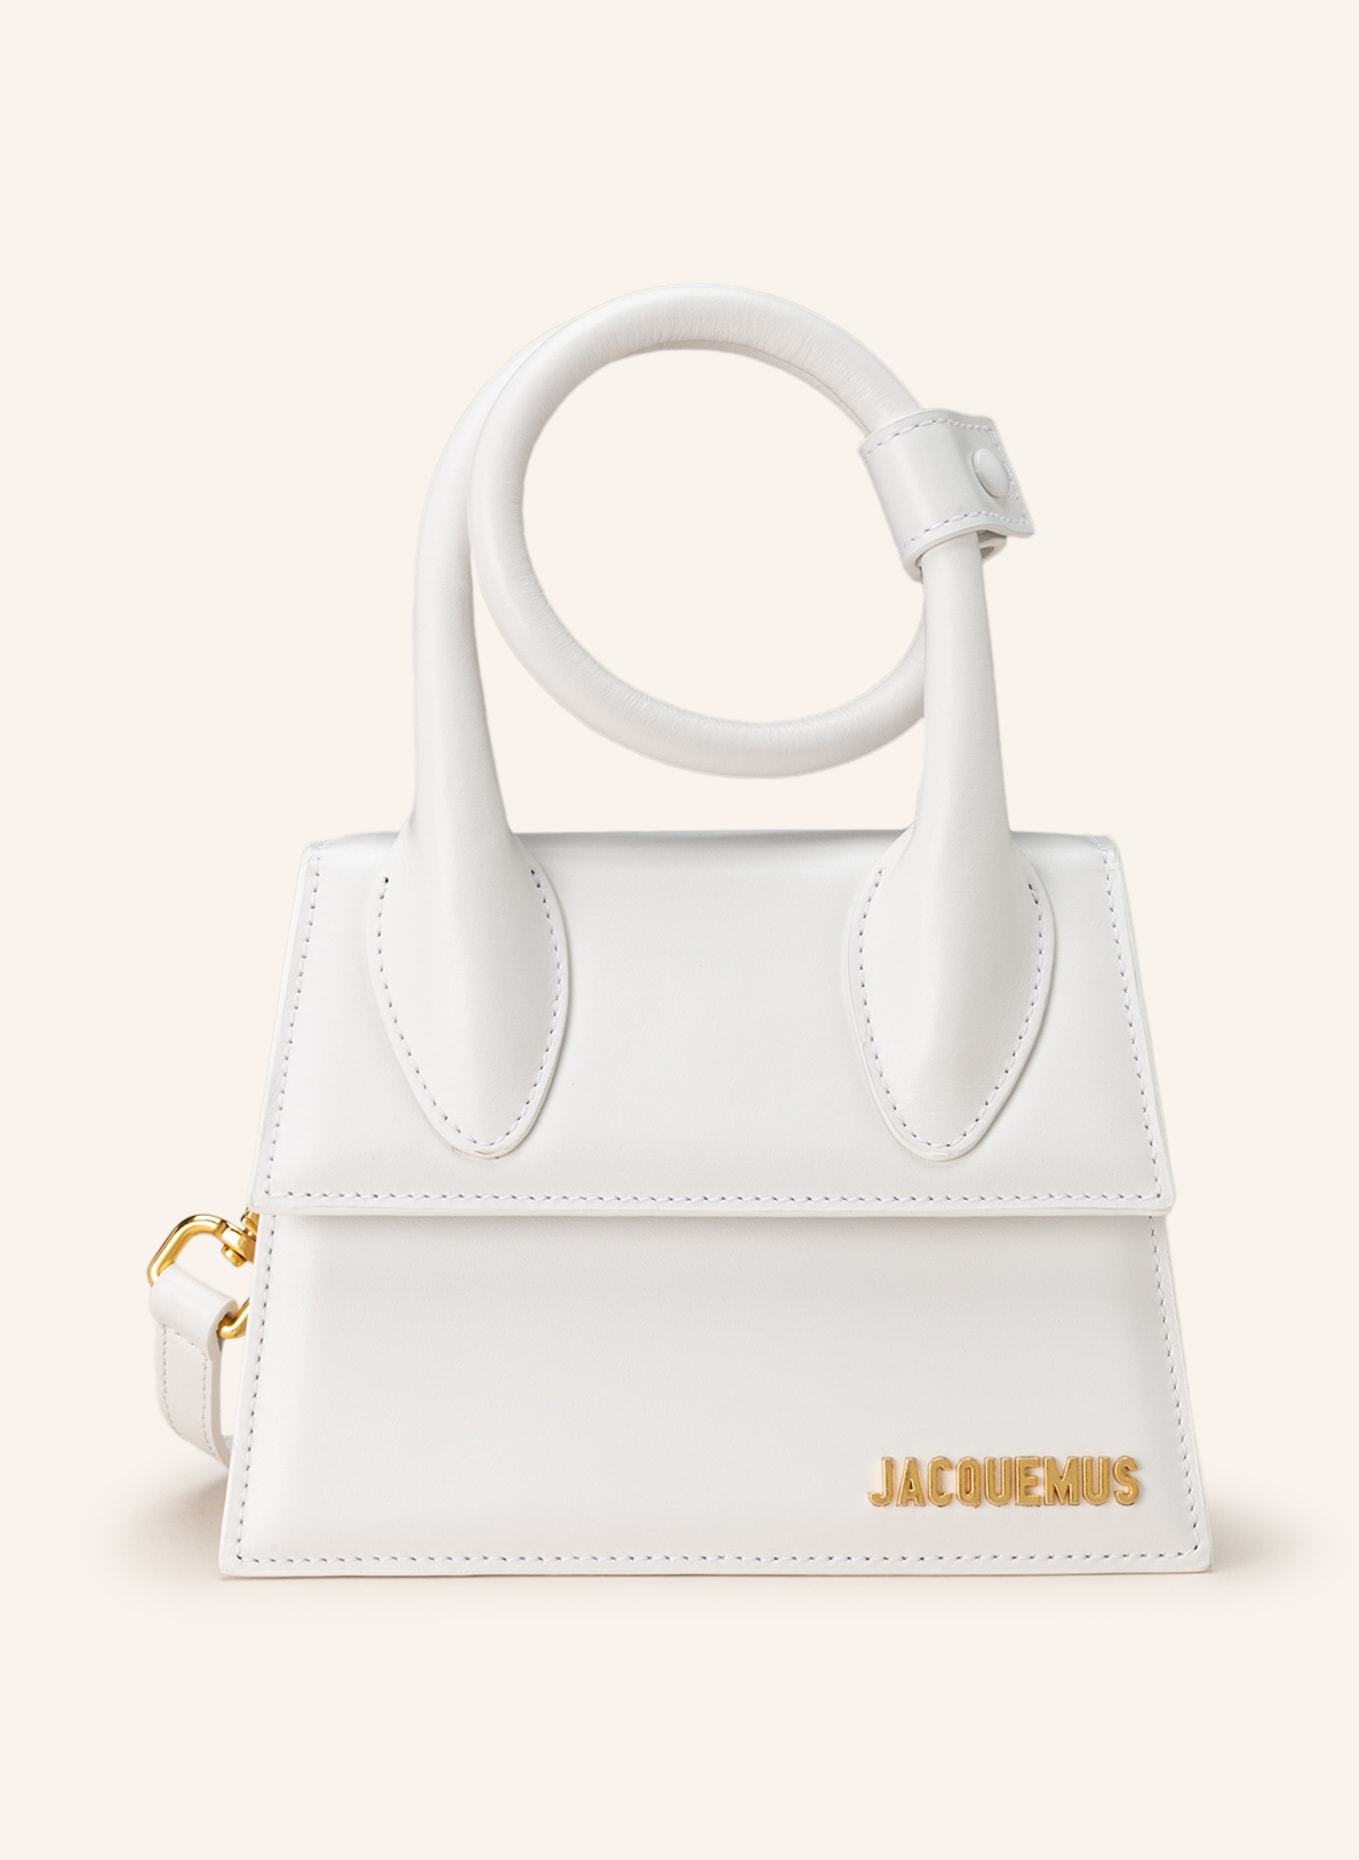 JACQUEMUS Handtasche LE CHIQUITO NOEUD, Farbe: WEISS (Bild 1)